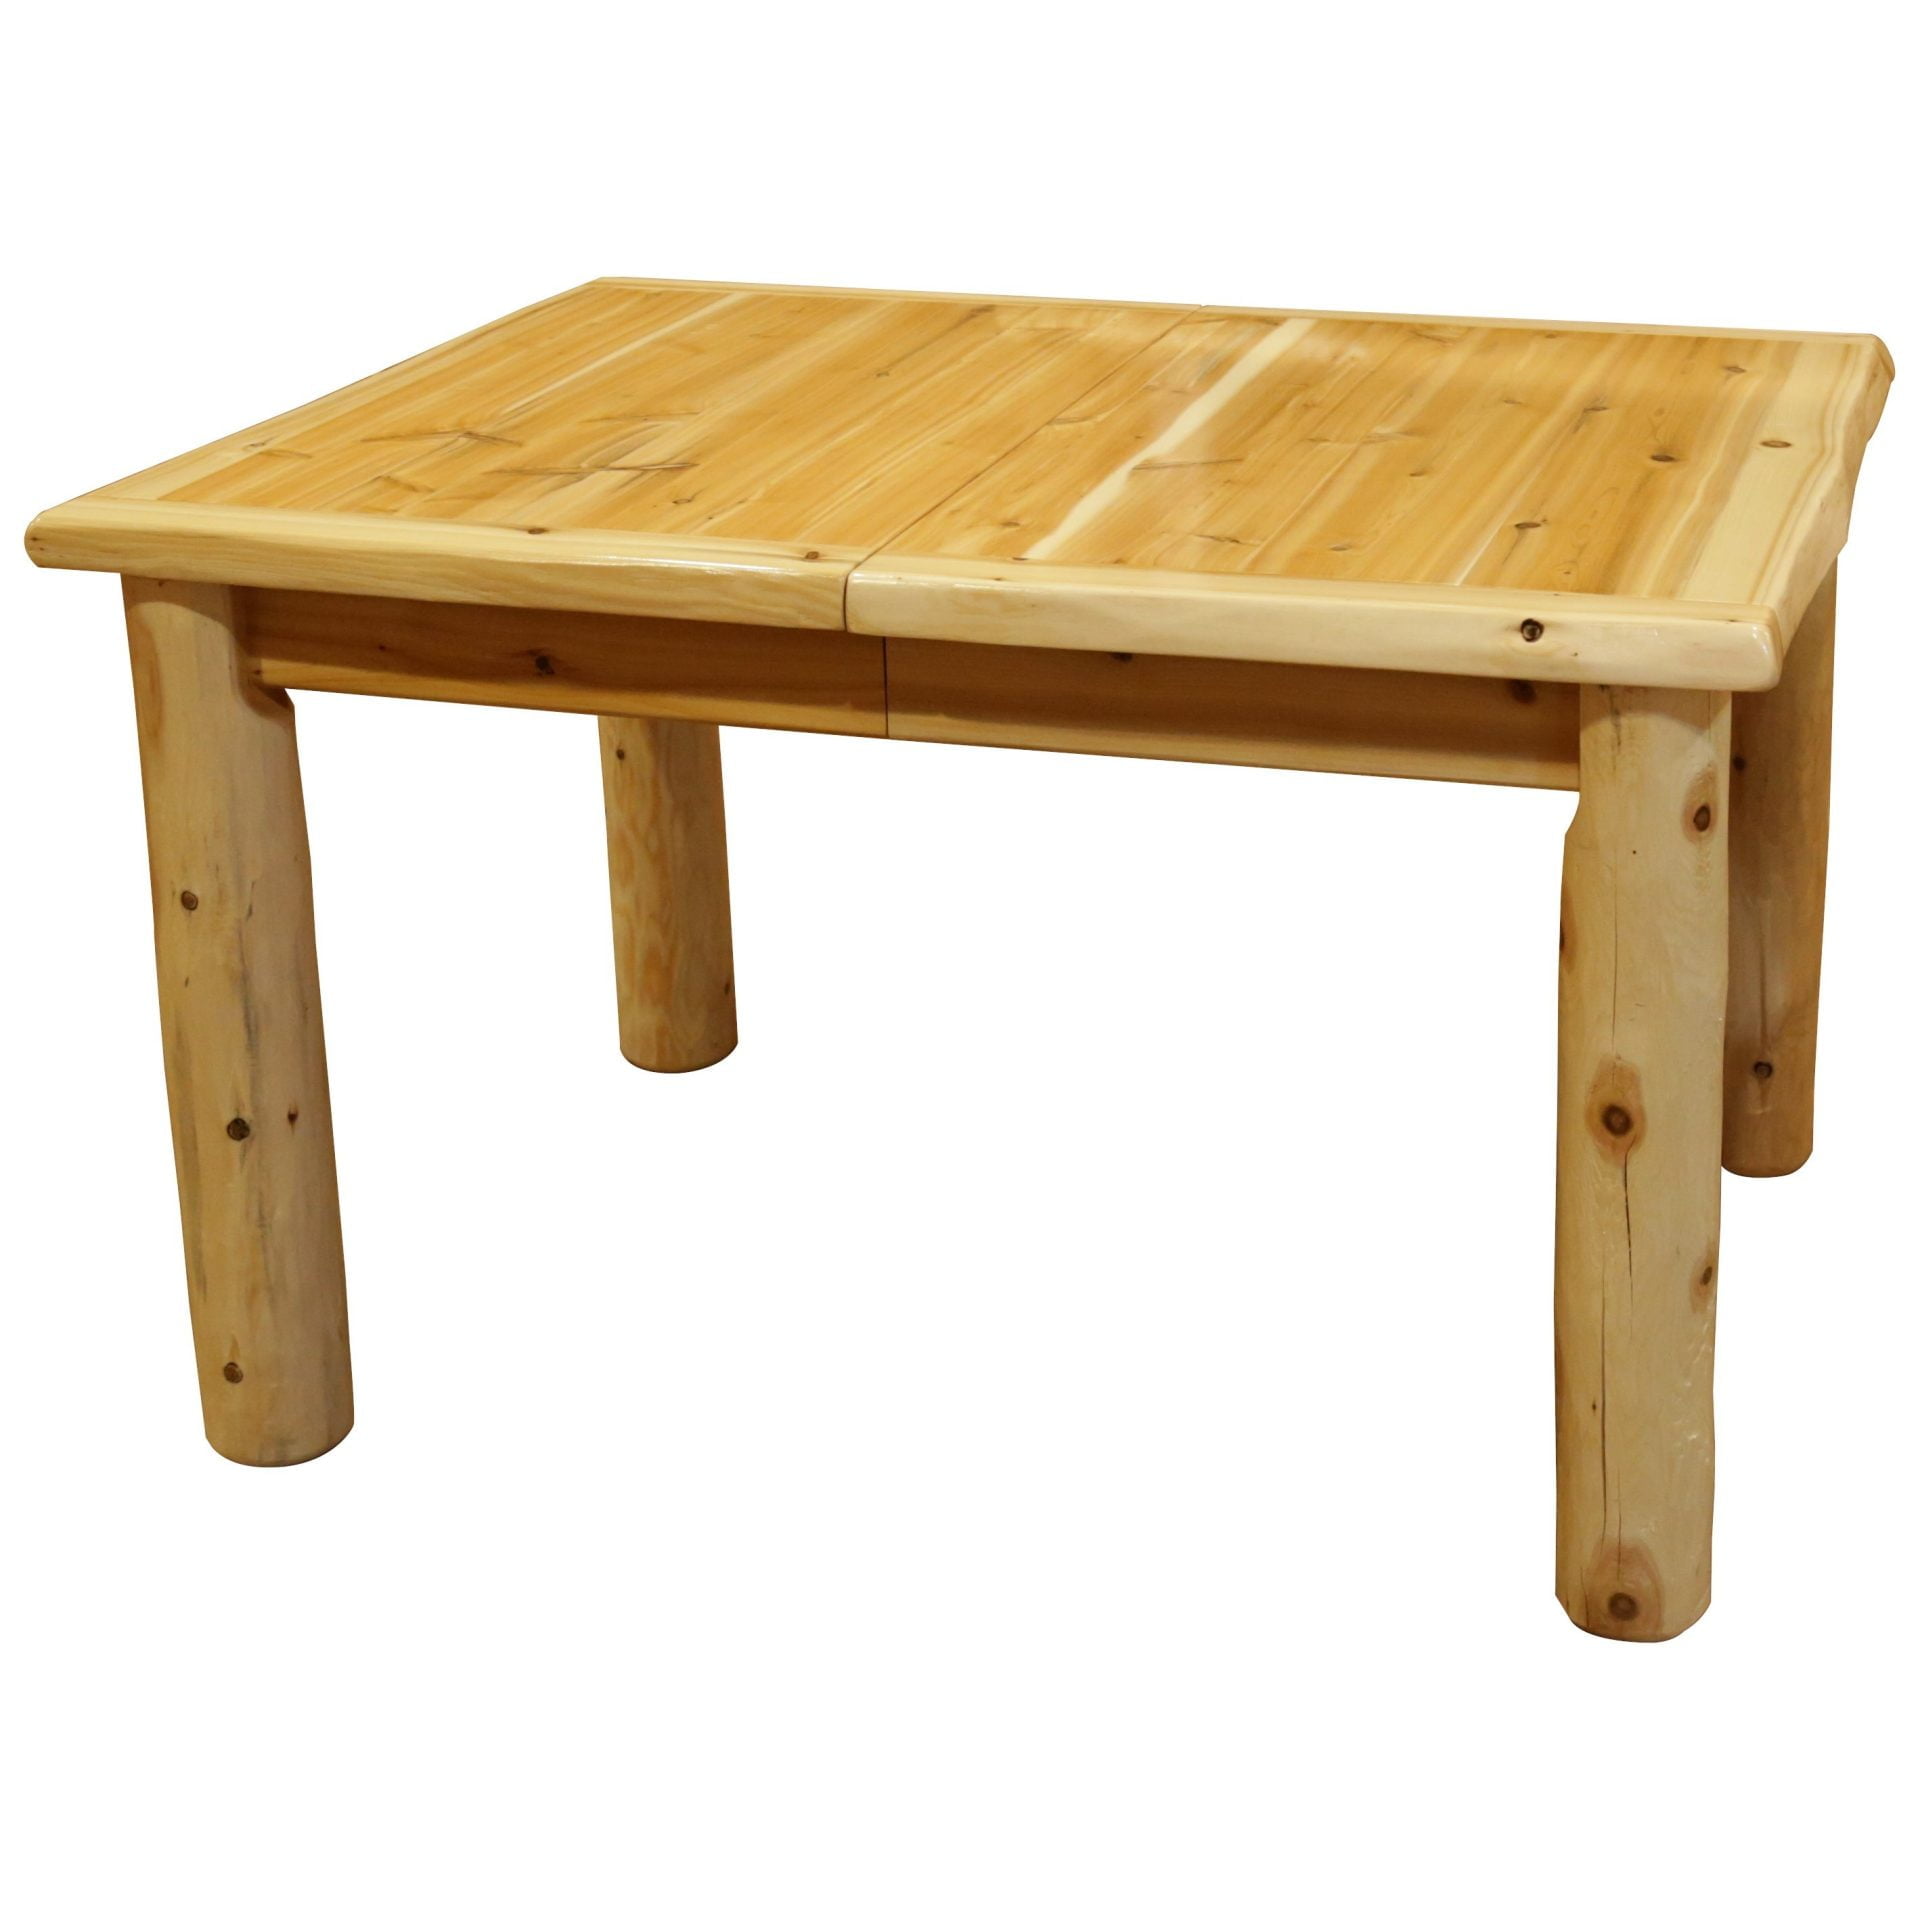 Rustic White Cedar Log Extension Dining Table